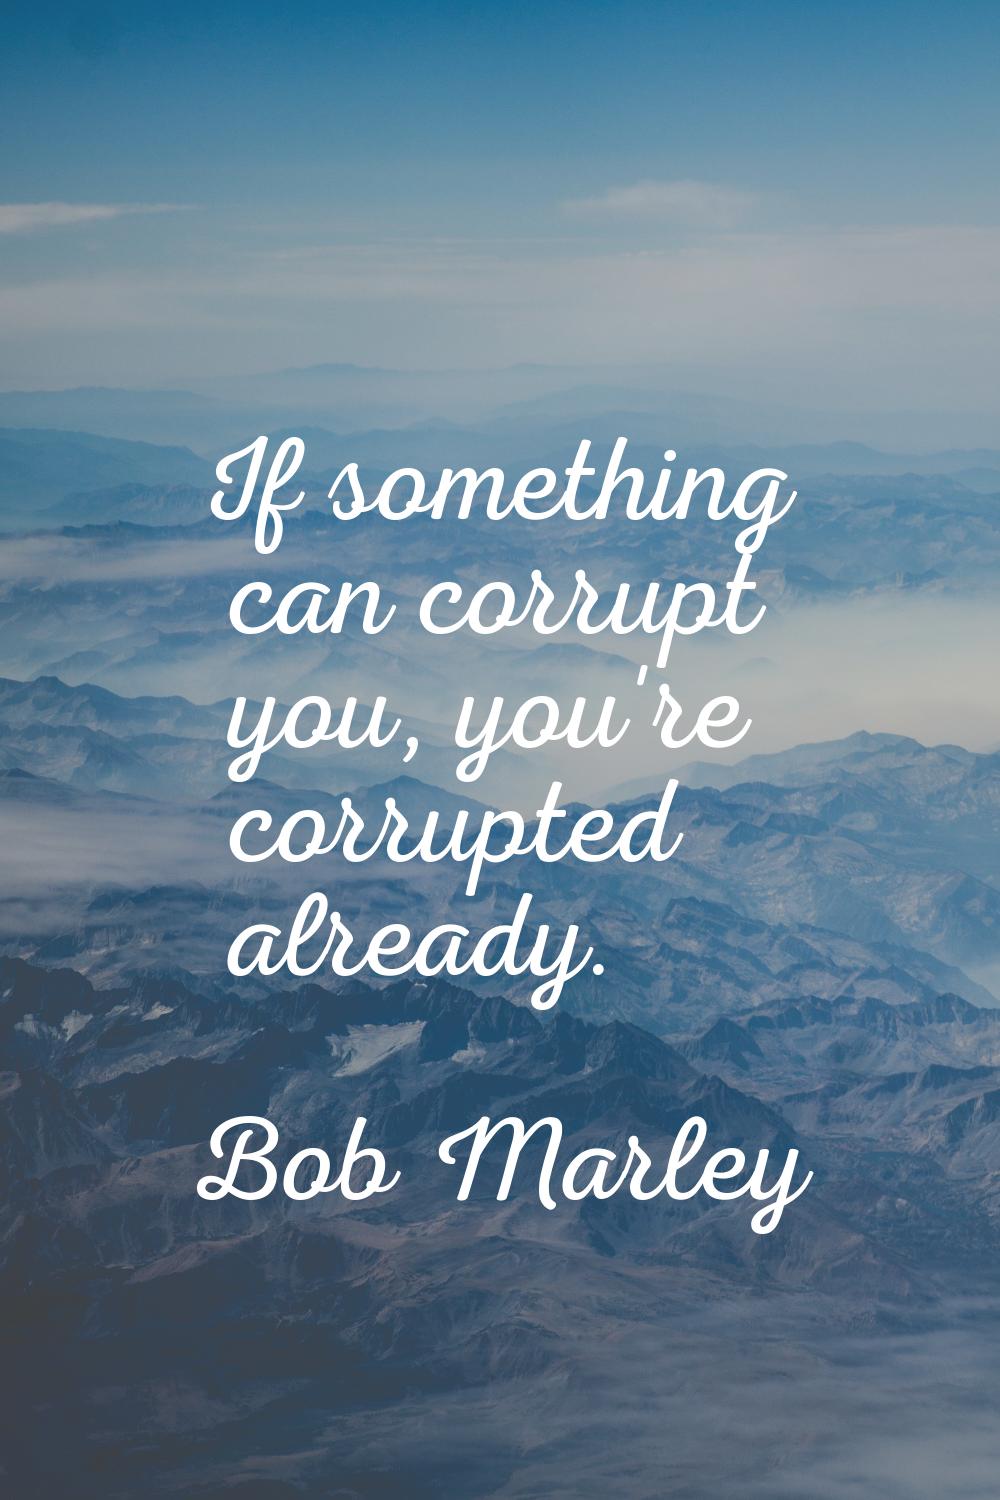 If something can corrupt you, you're corrupted already.